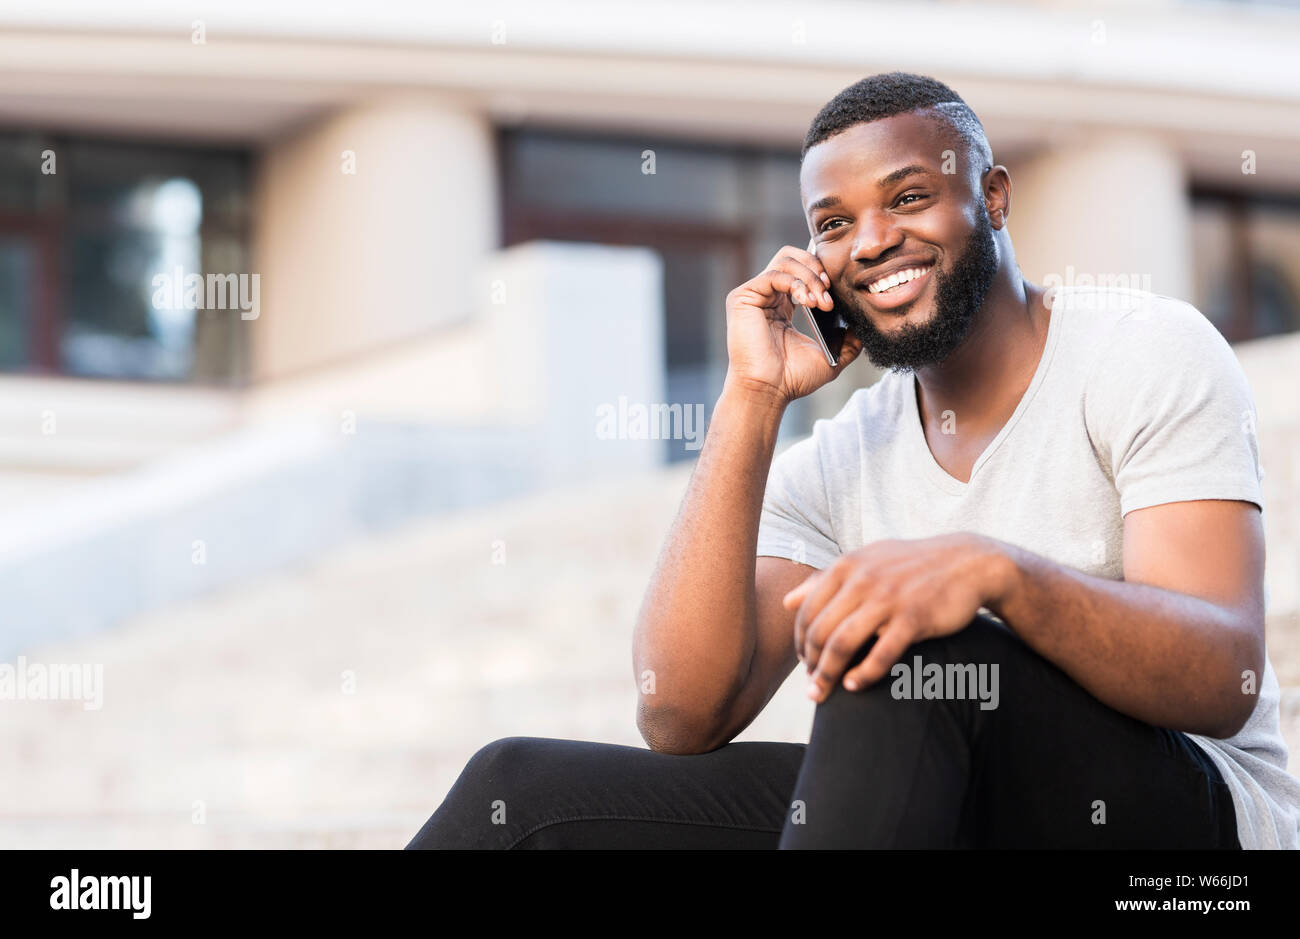 Shy african guy with white smile talking on phone with happiness Stock Photo